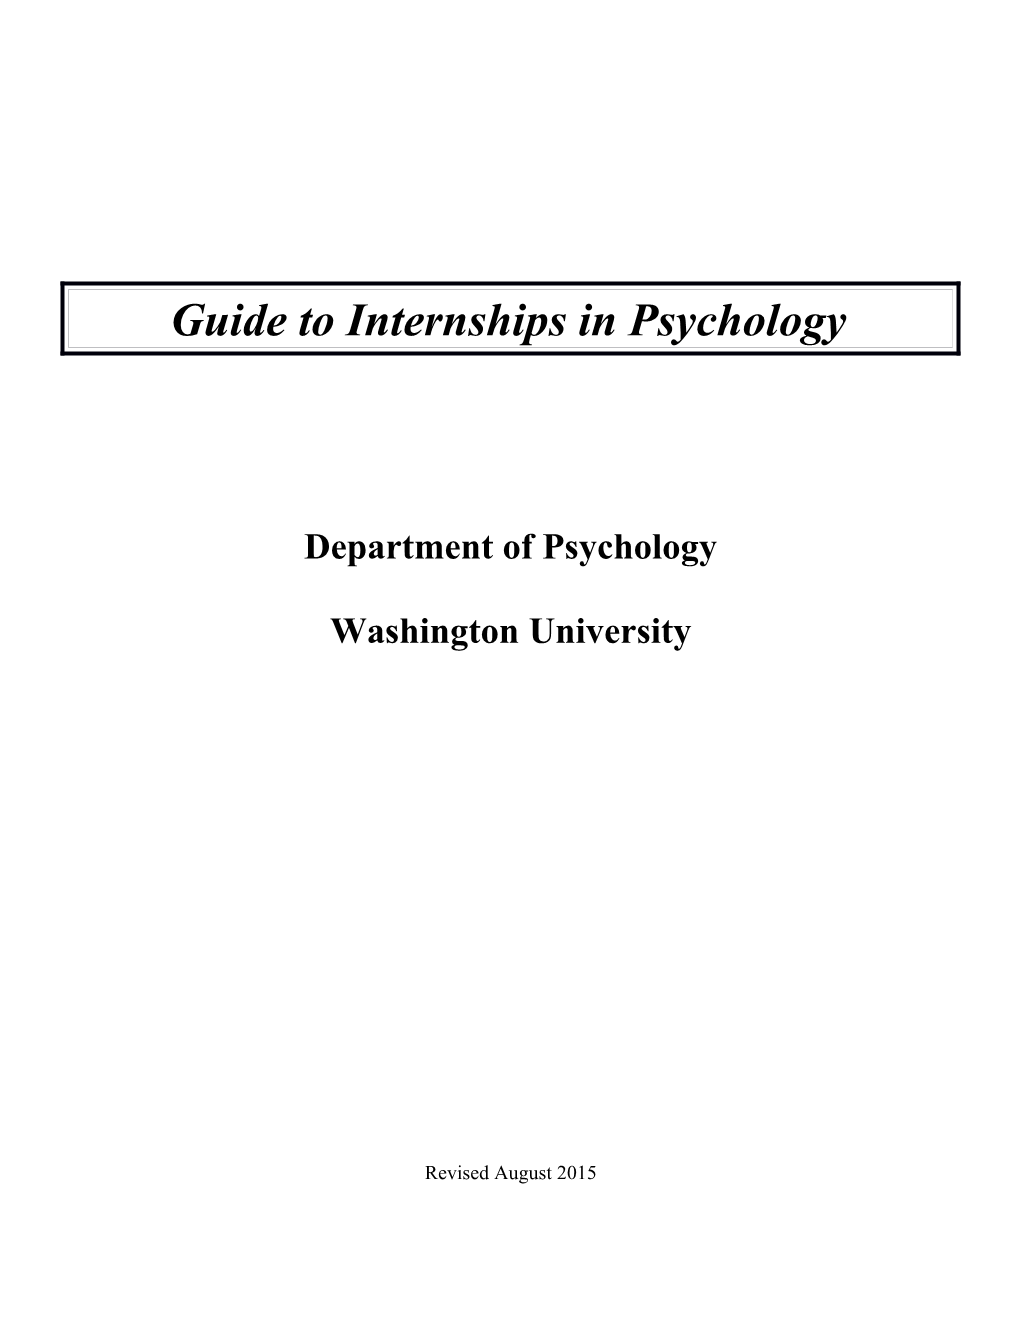 A Guide to Internship in Psychology